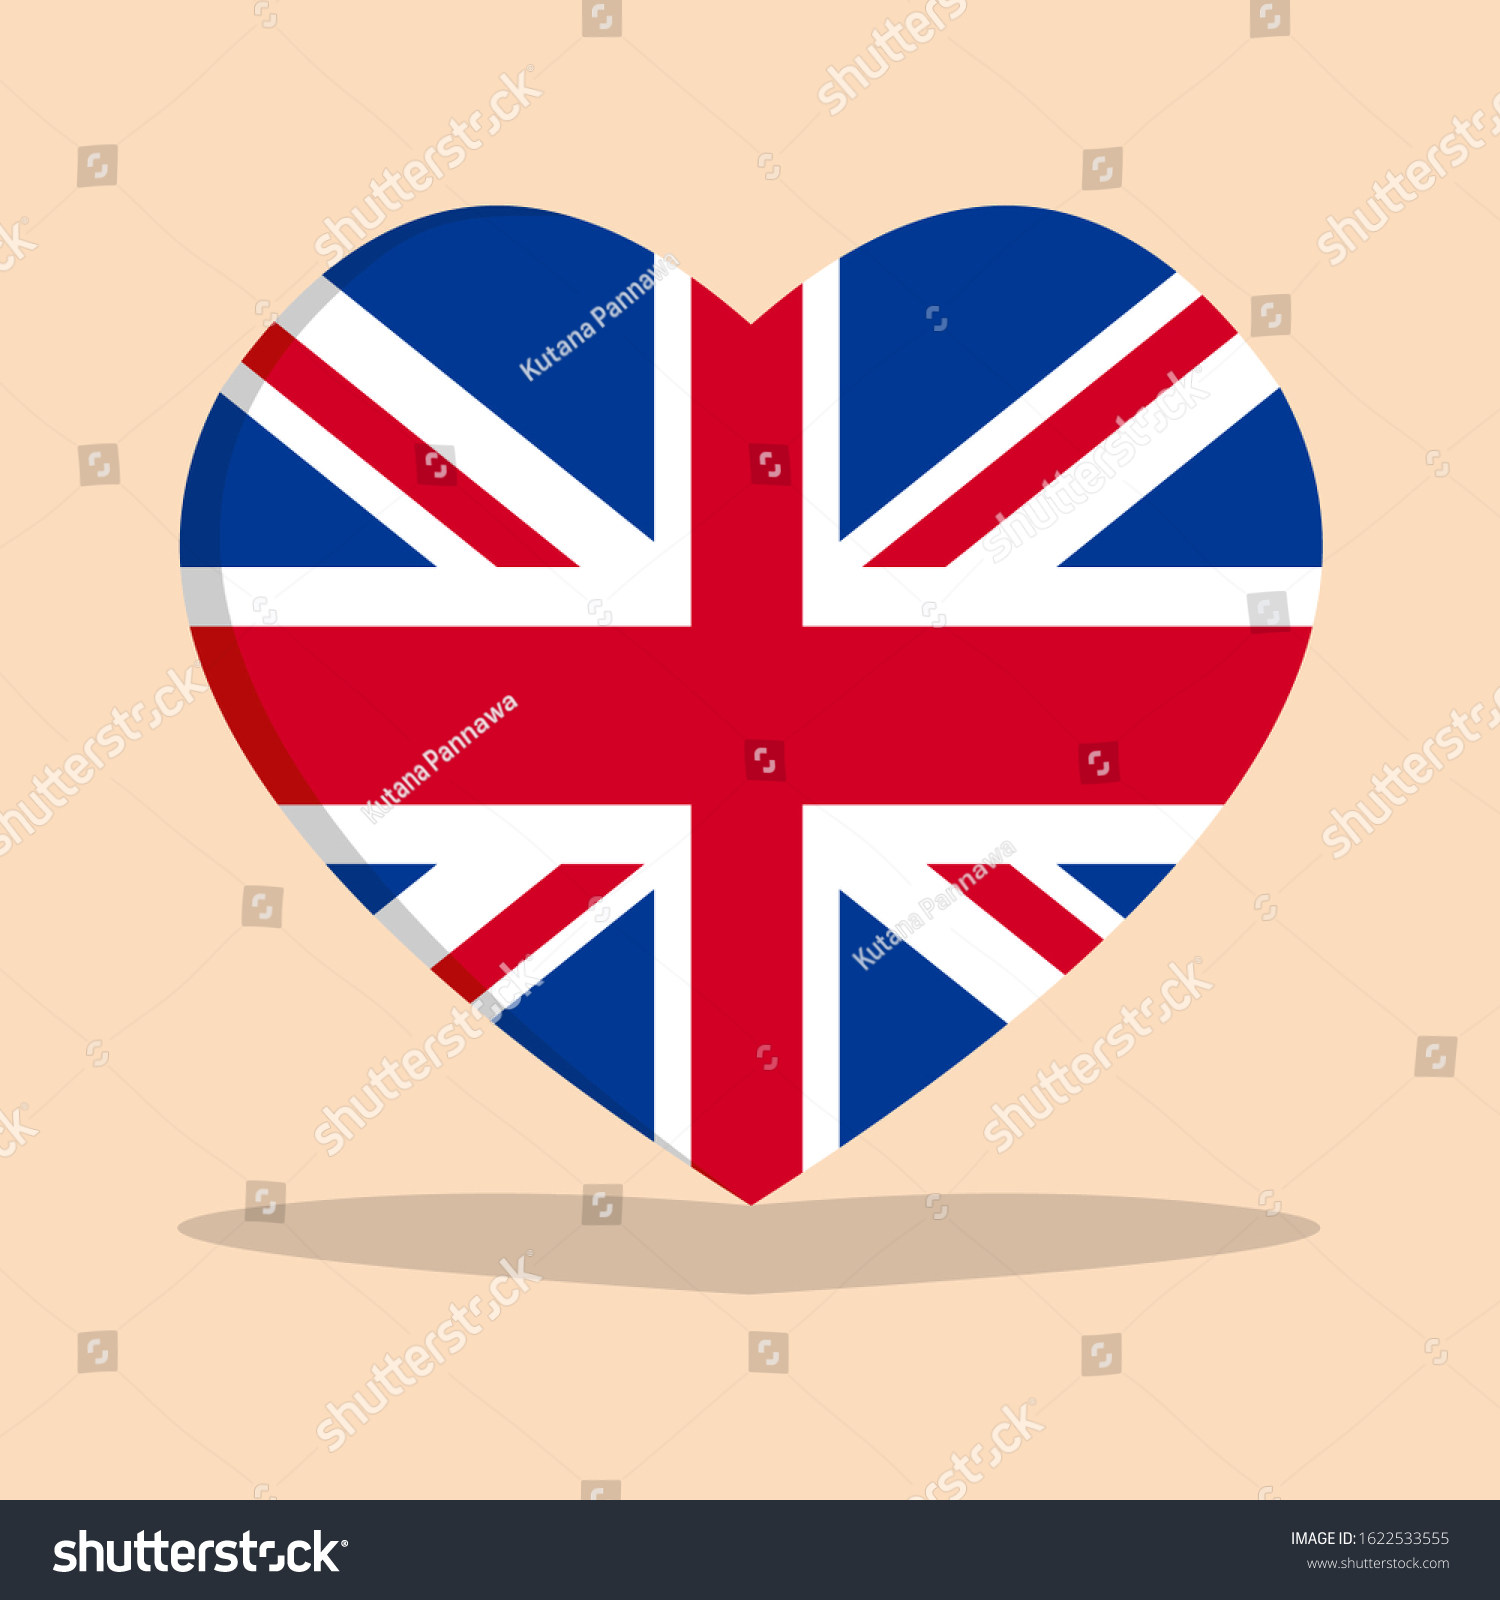 SVG of The national flag of united kingdom love icon isolated on cream background vector illustration. svg